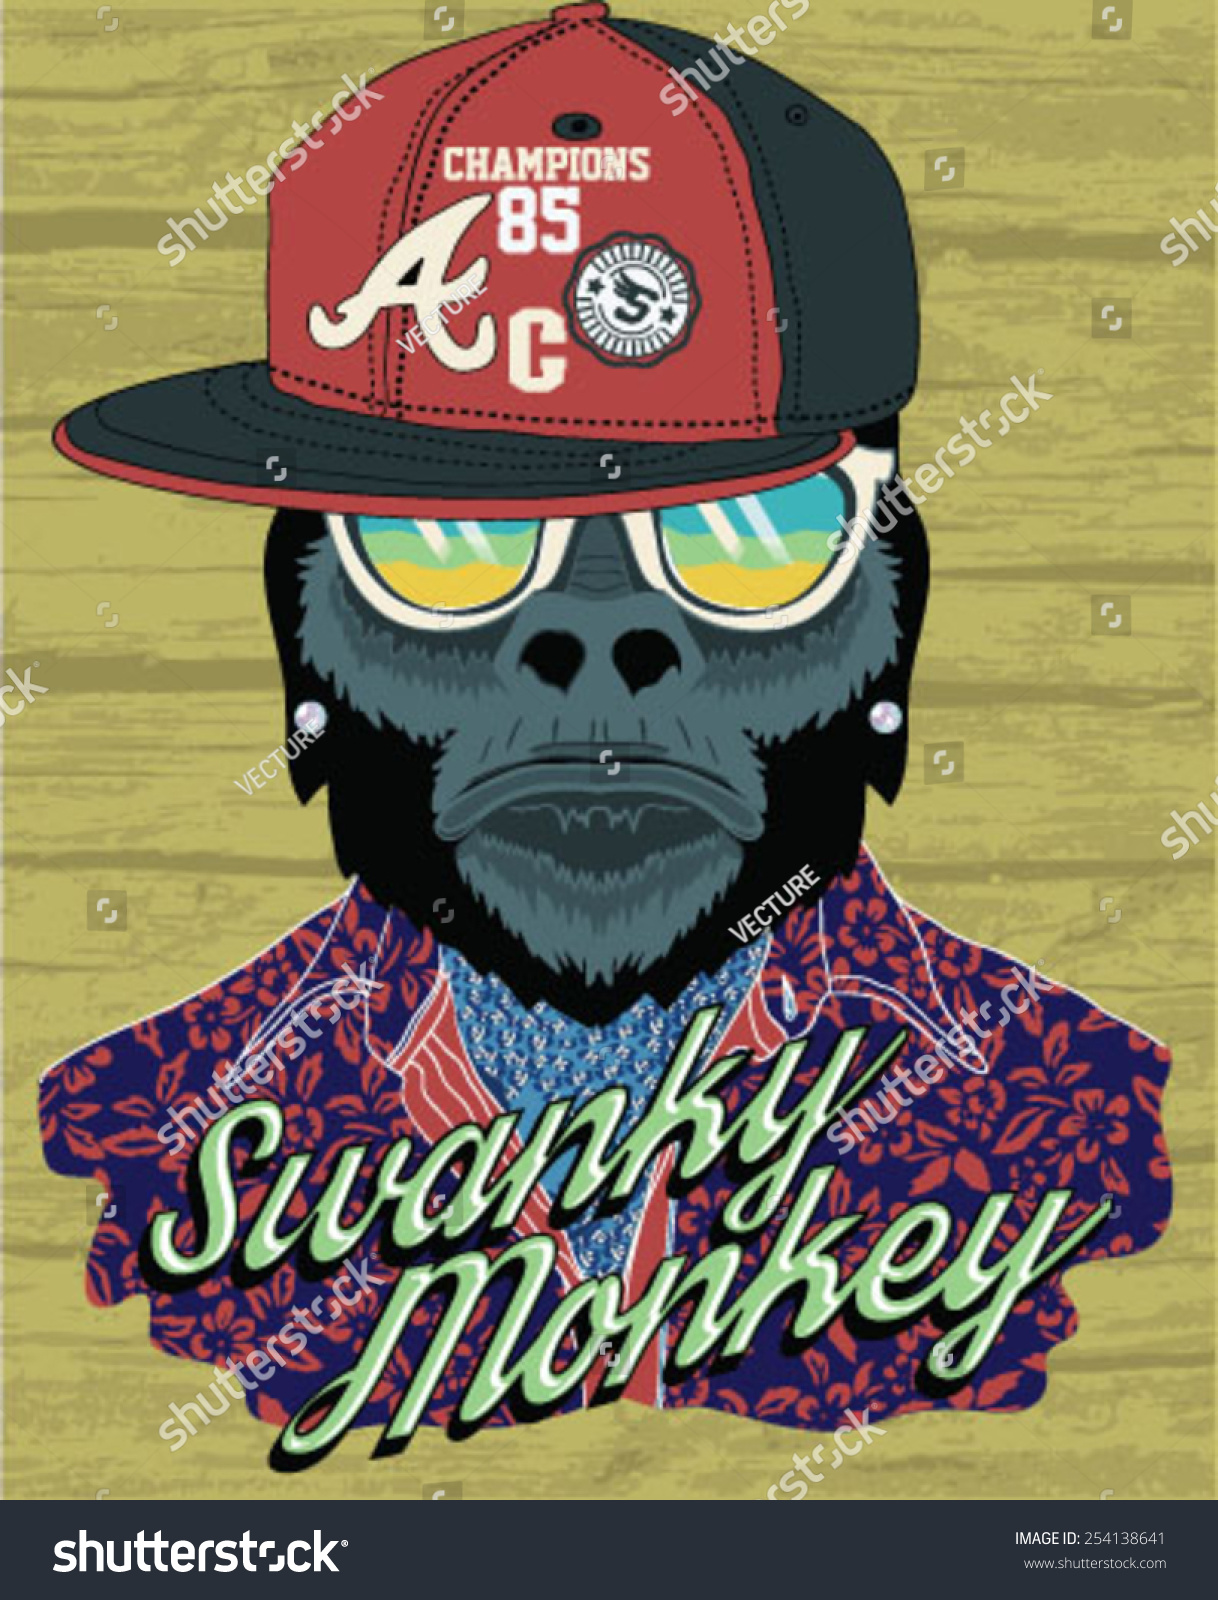 Vector Illustration, Funny Monkey With Glasses - 254138641 : Shutterstock